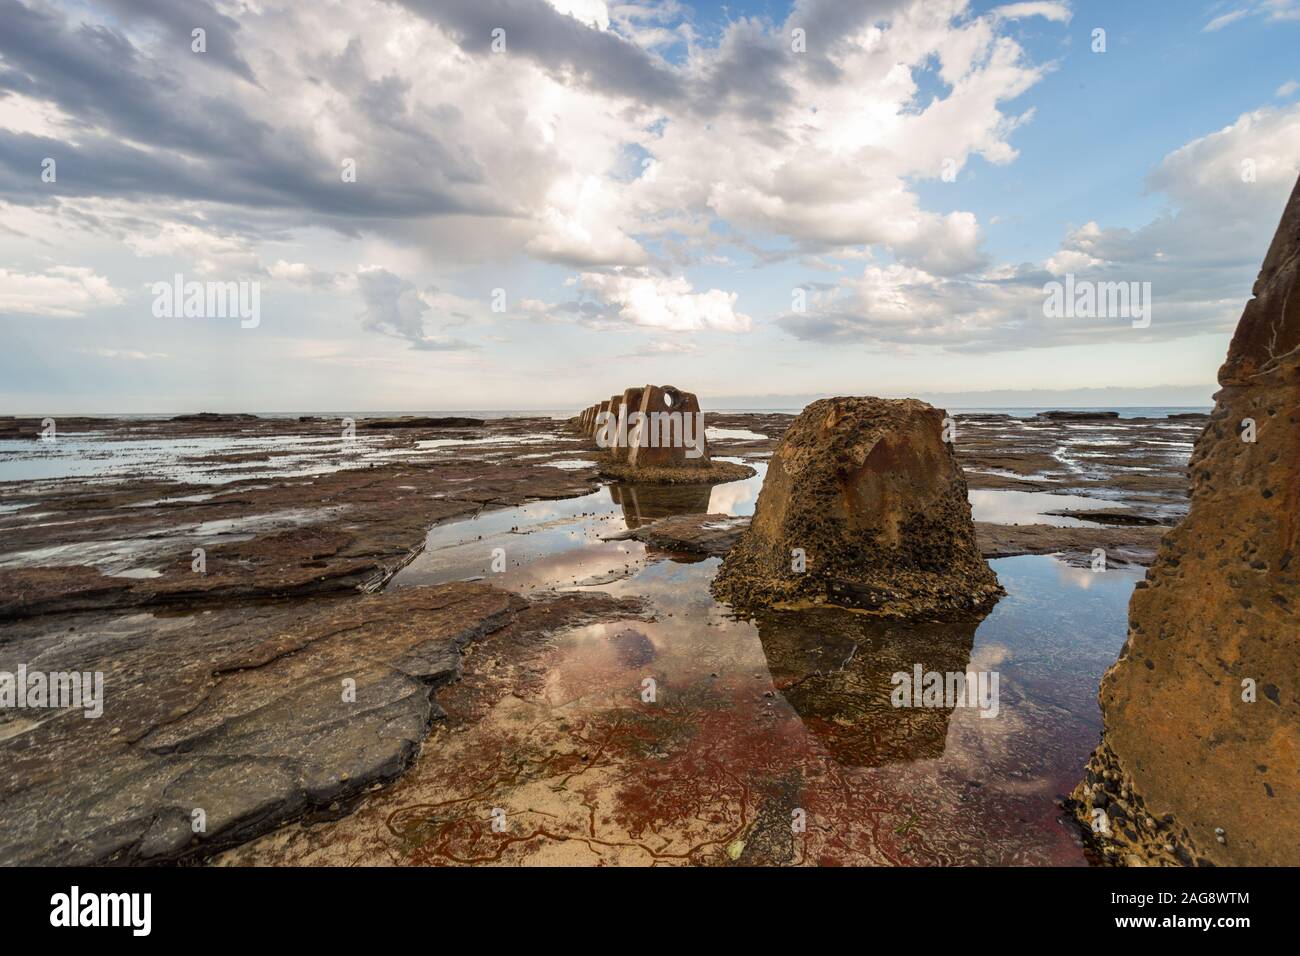 Beautiful shot of a brown rock formation surrounded by the ocean water under the cloudy sky Stock Photo